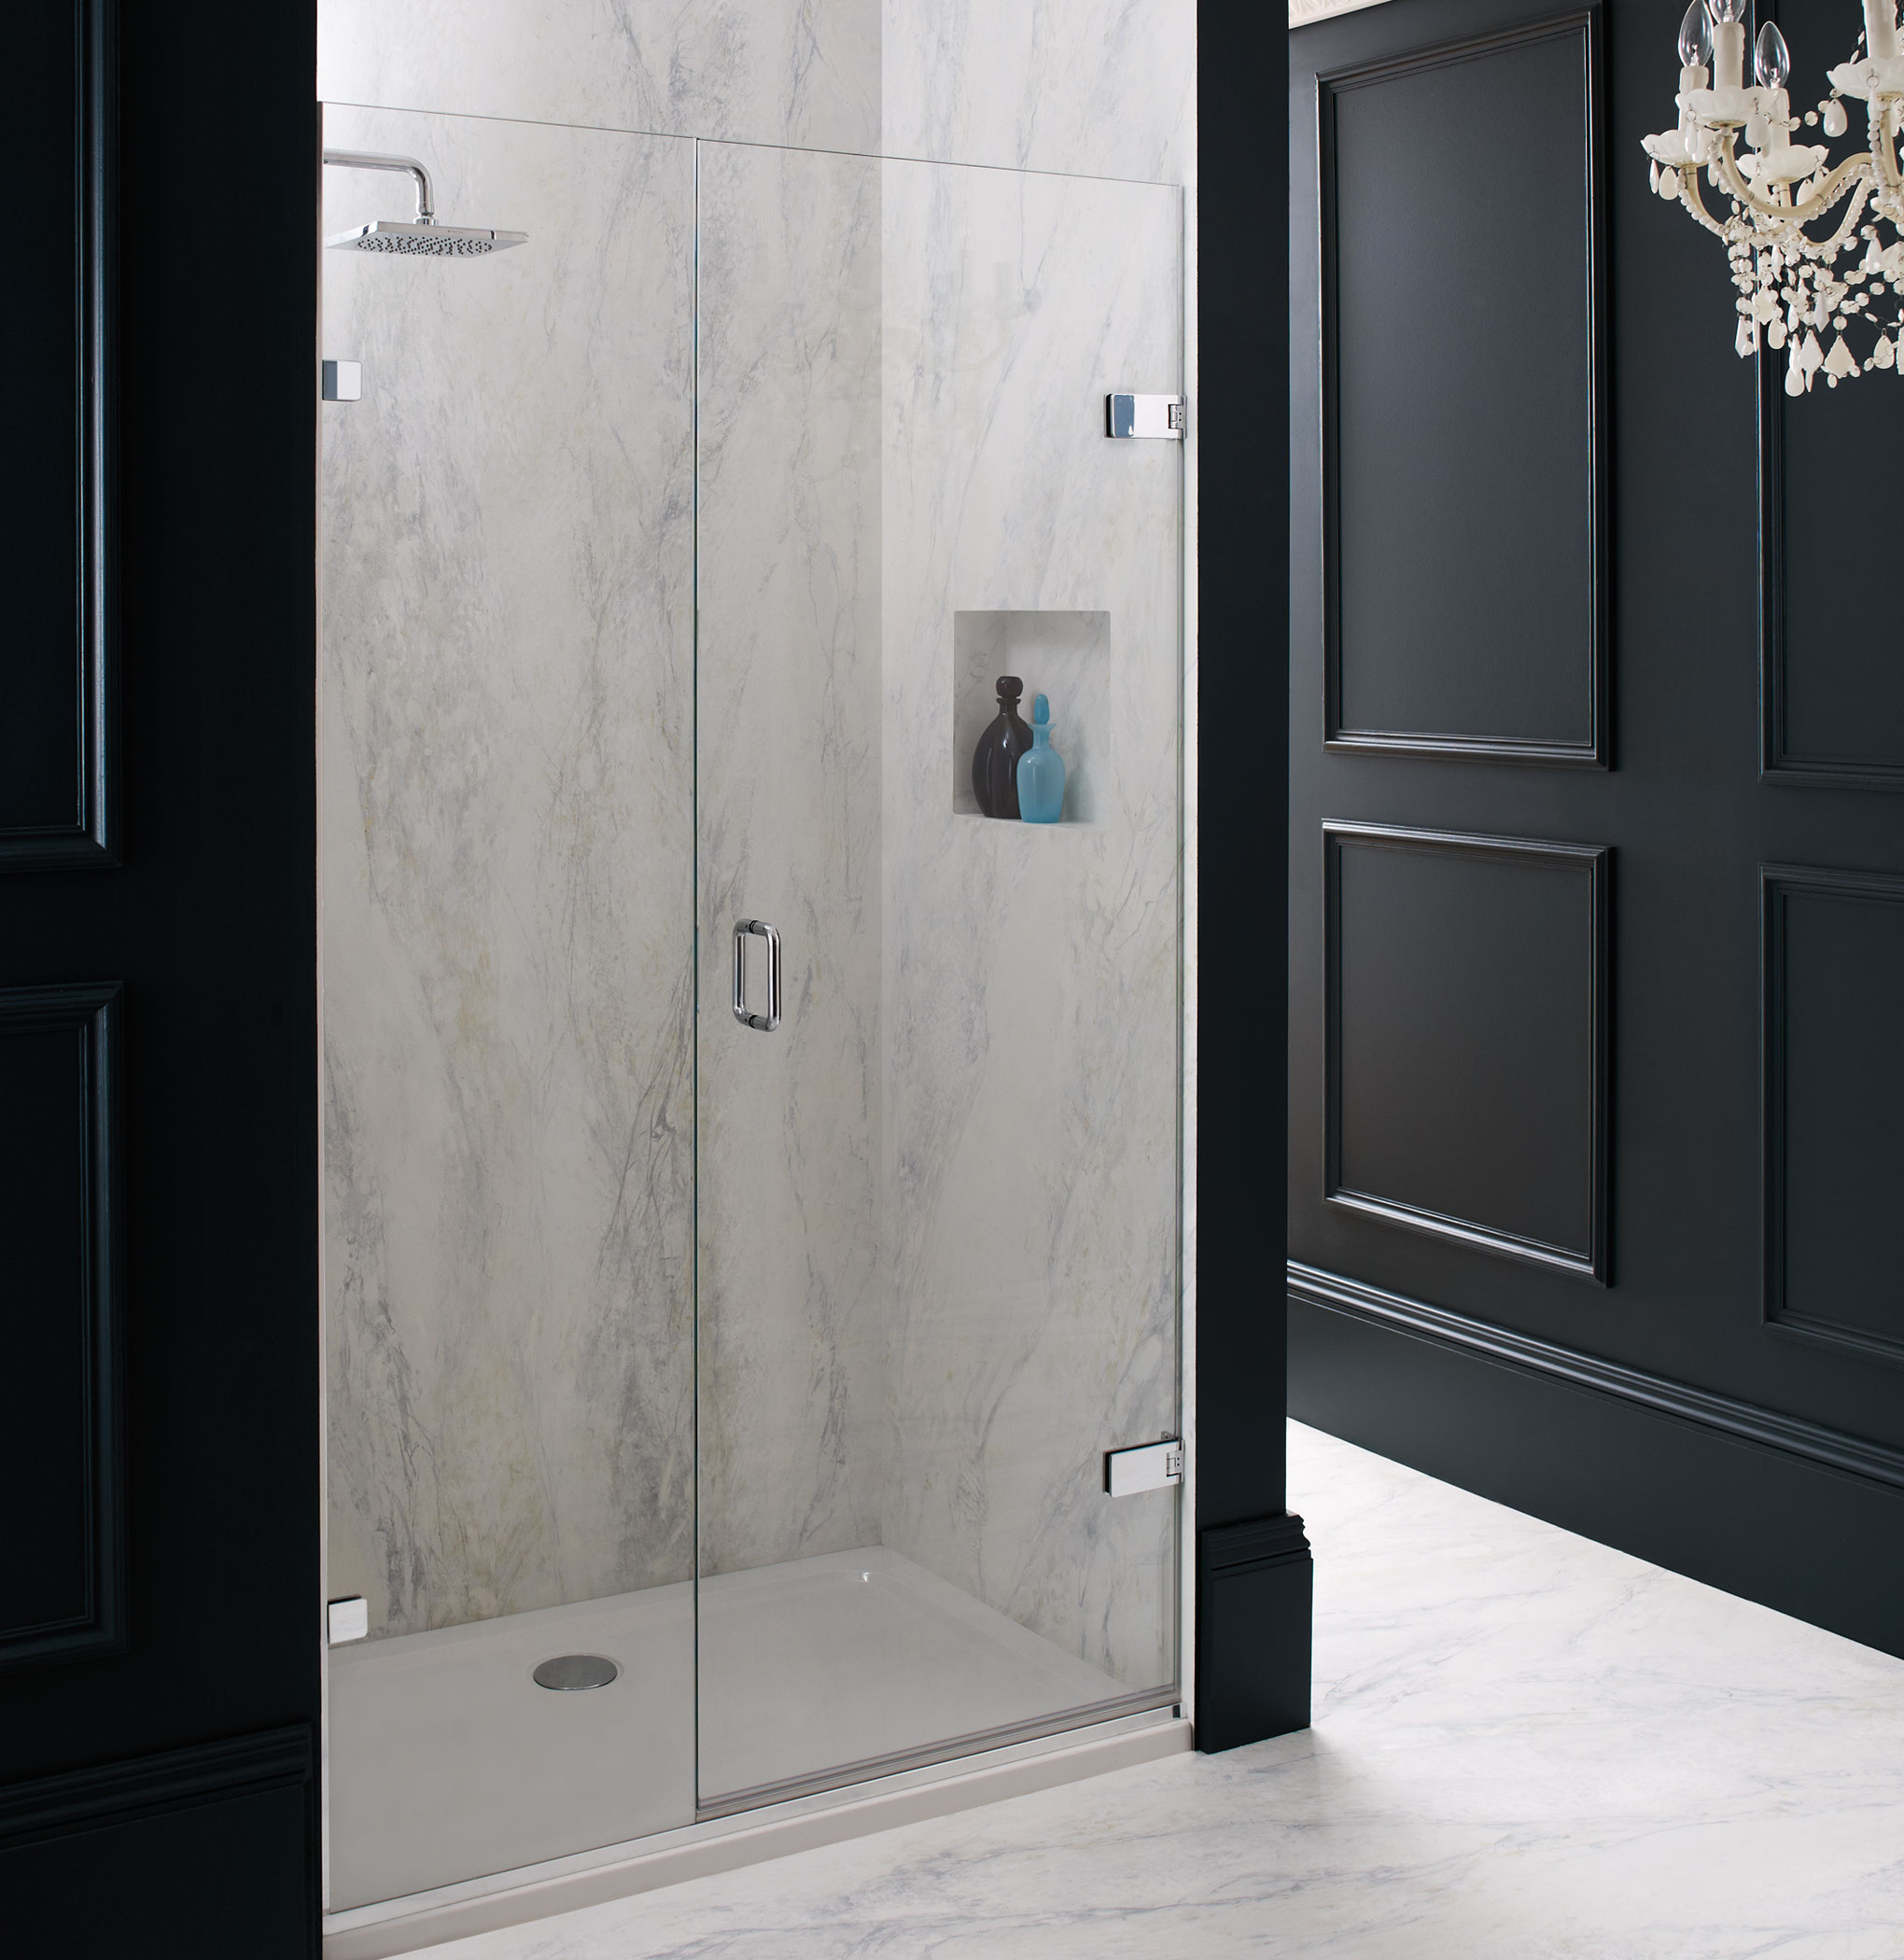 Rio Steam Room Glass Shower Enclosures Majestic Shower Company Ltd within dimensions 2040 X 2100